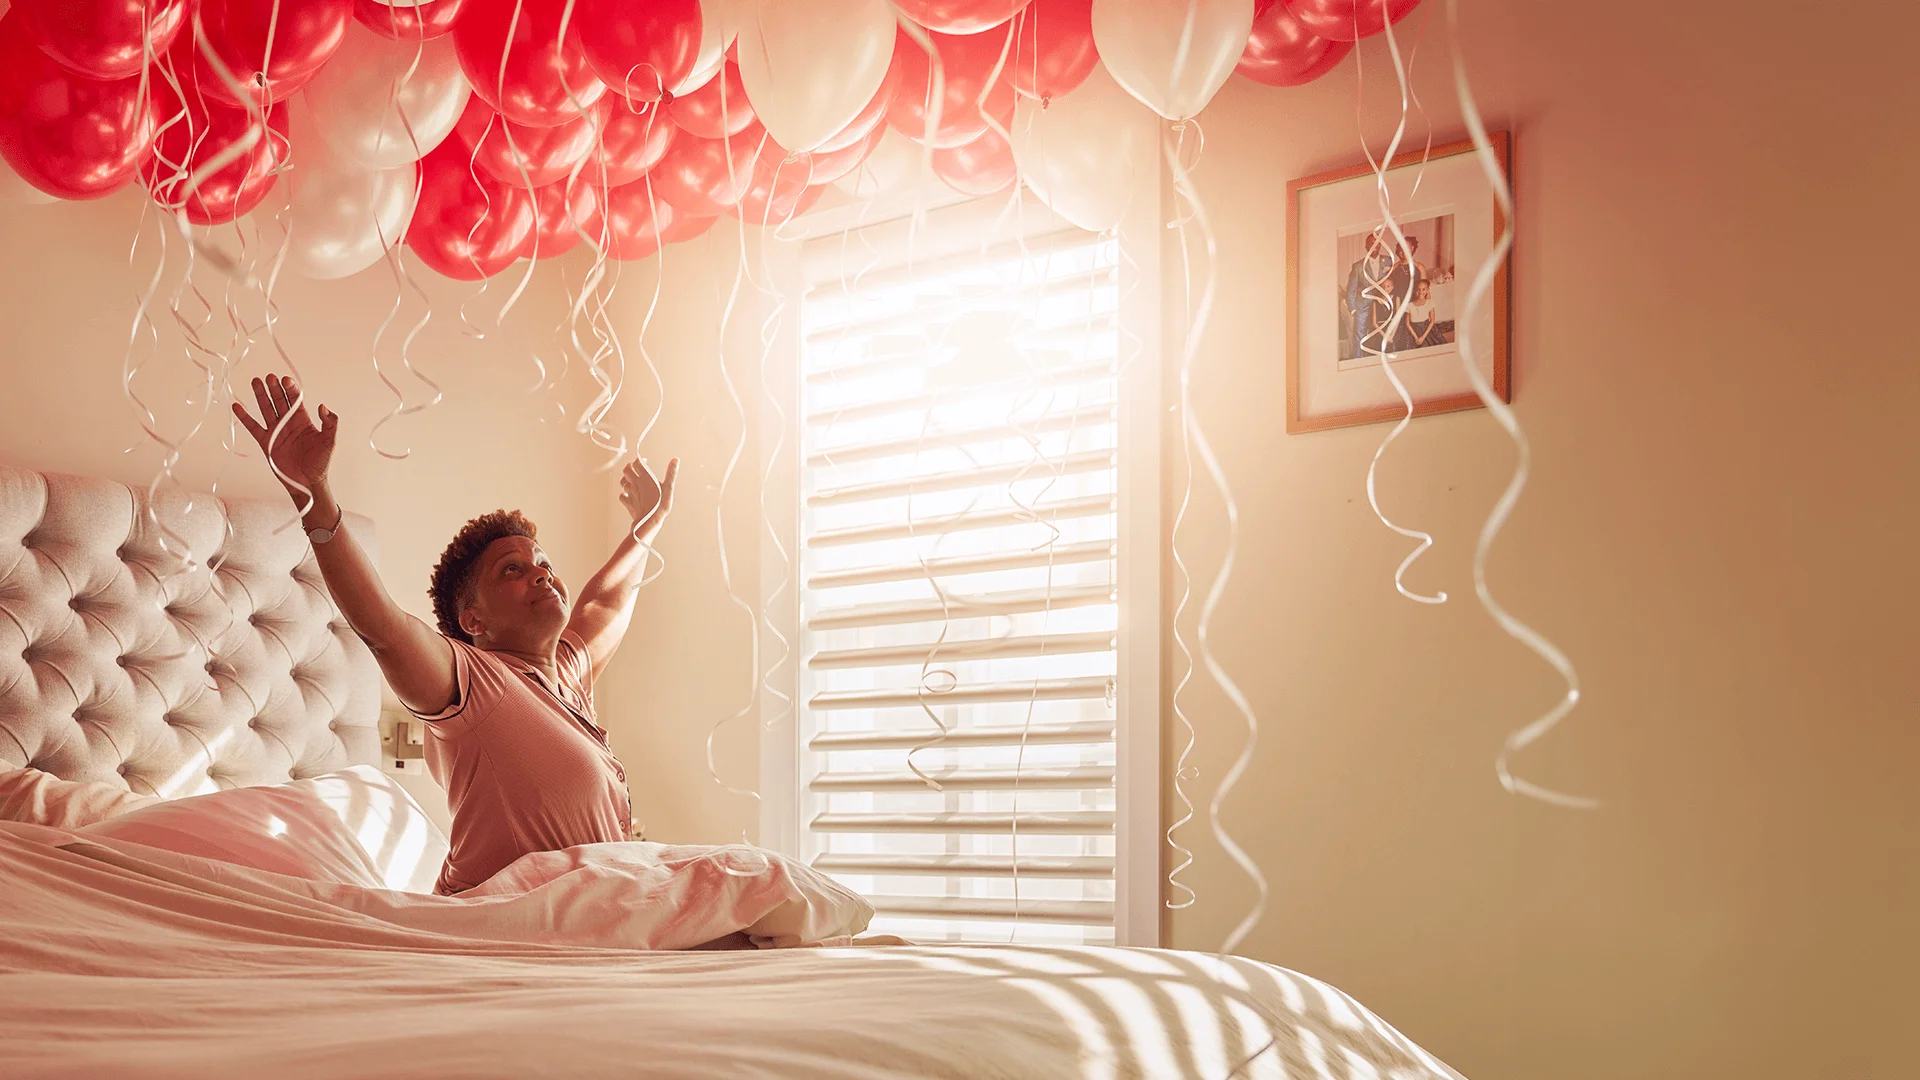 Katherine celebrates in bed with a room full of balloons